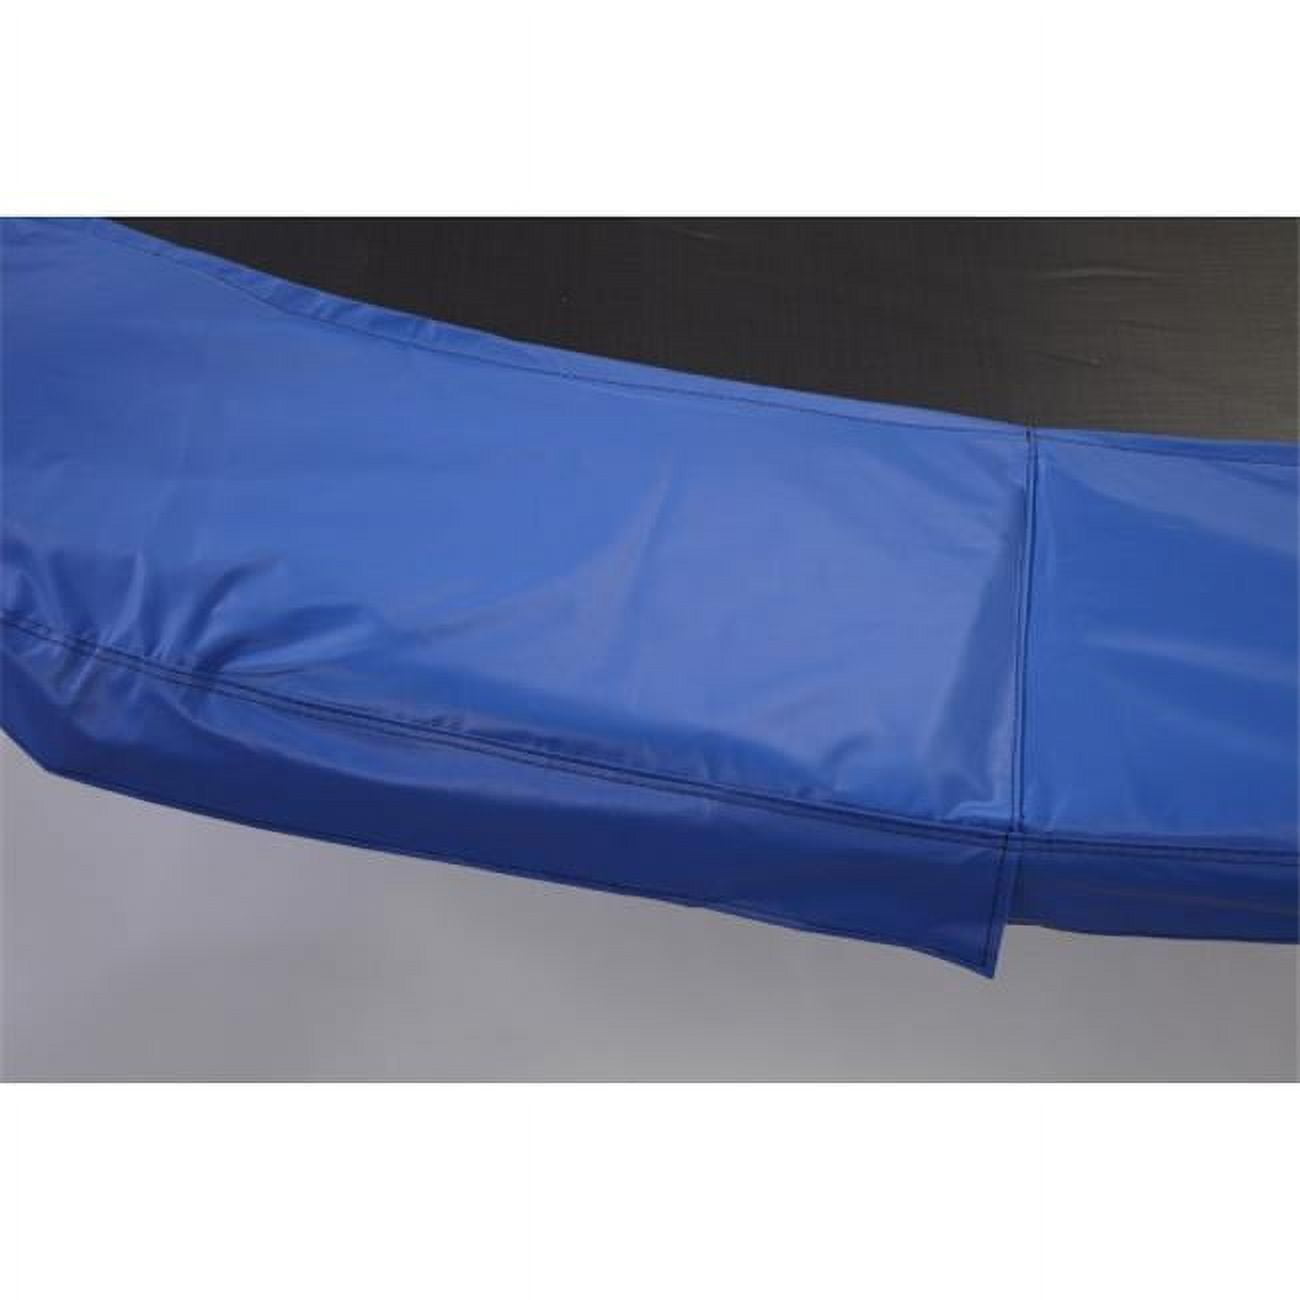 Picture of Jumpking PAD12HD-13B 12 ft. x 13 in. Wide Heavy Duty Safety Pad  Blue